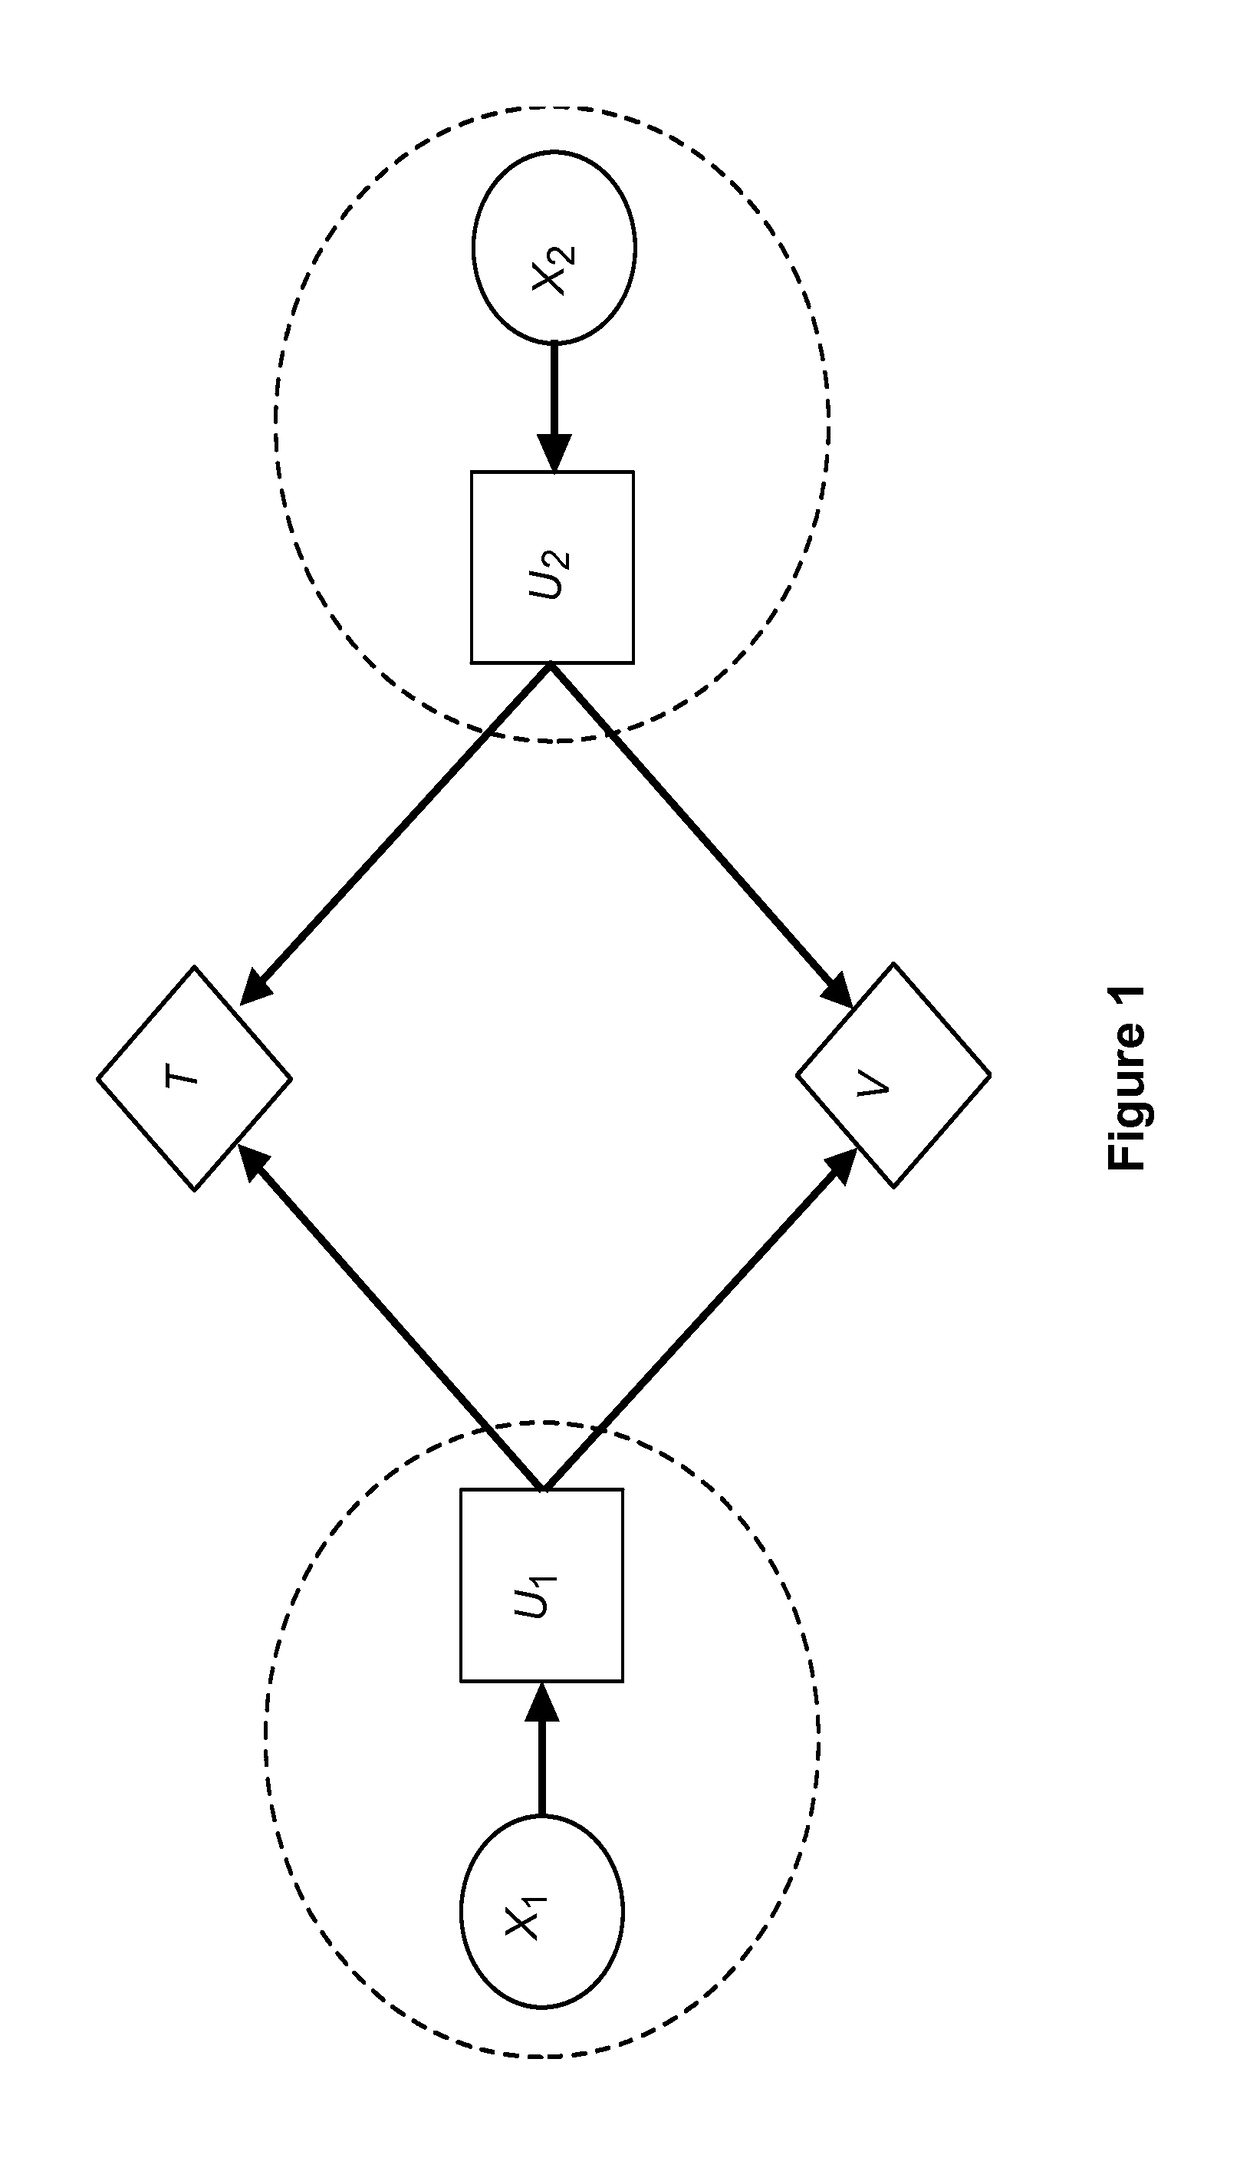 Quantum-assisted load balancing in communication-constrained wide-area physical networks